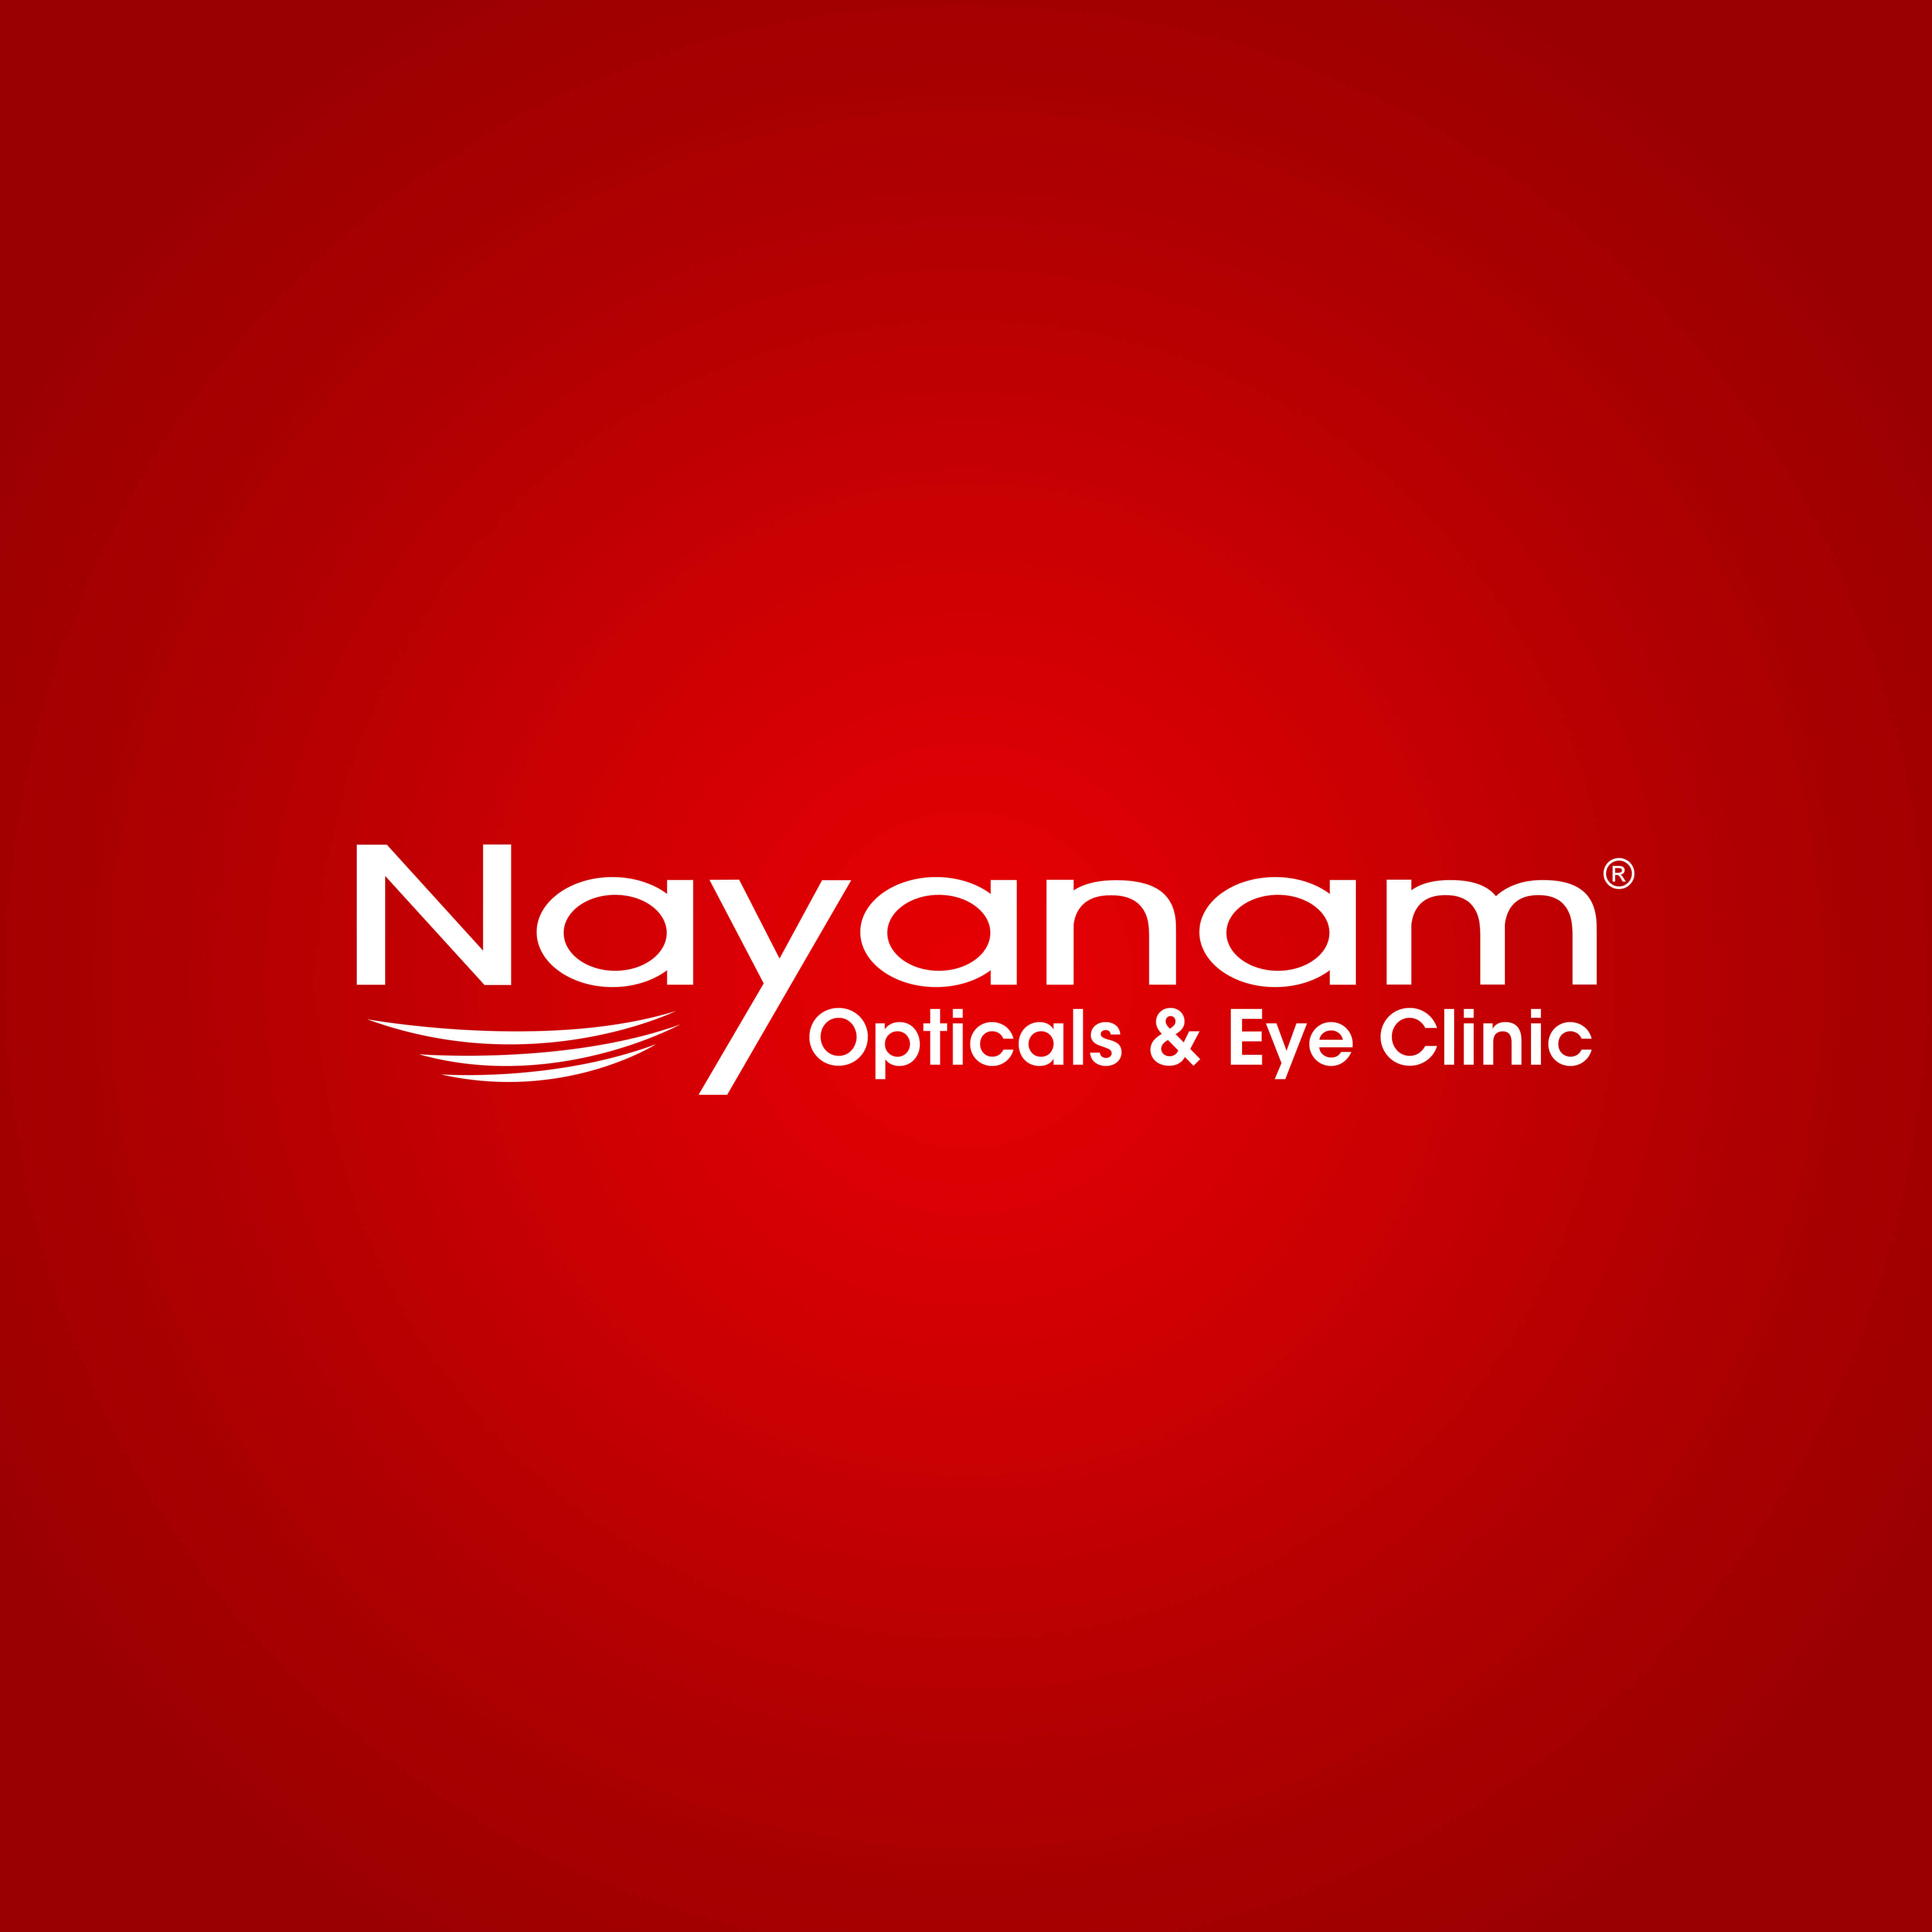 Discover the new trending Sunglasses, Eyeglasses and Contact Lenses and shop everything online including many accessories from Nayanam Opticals & Eye Clinic